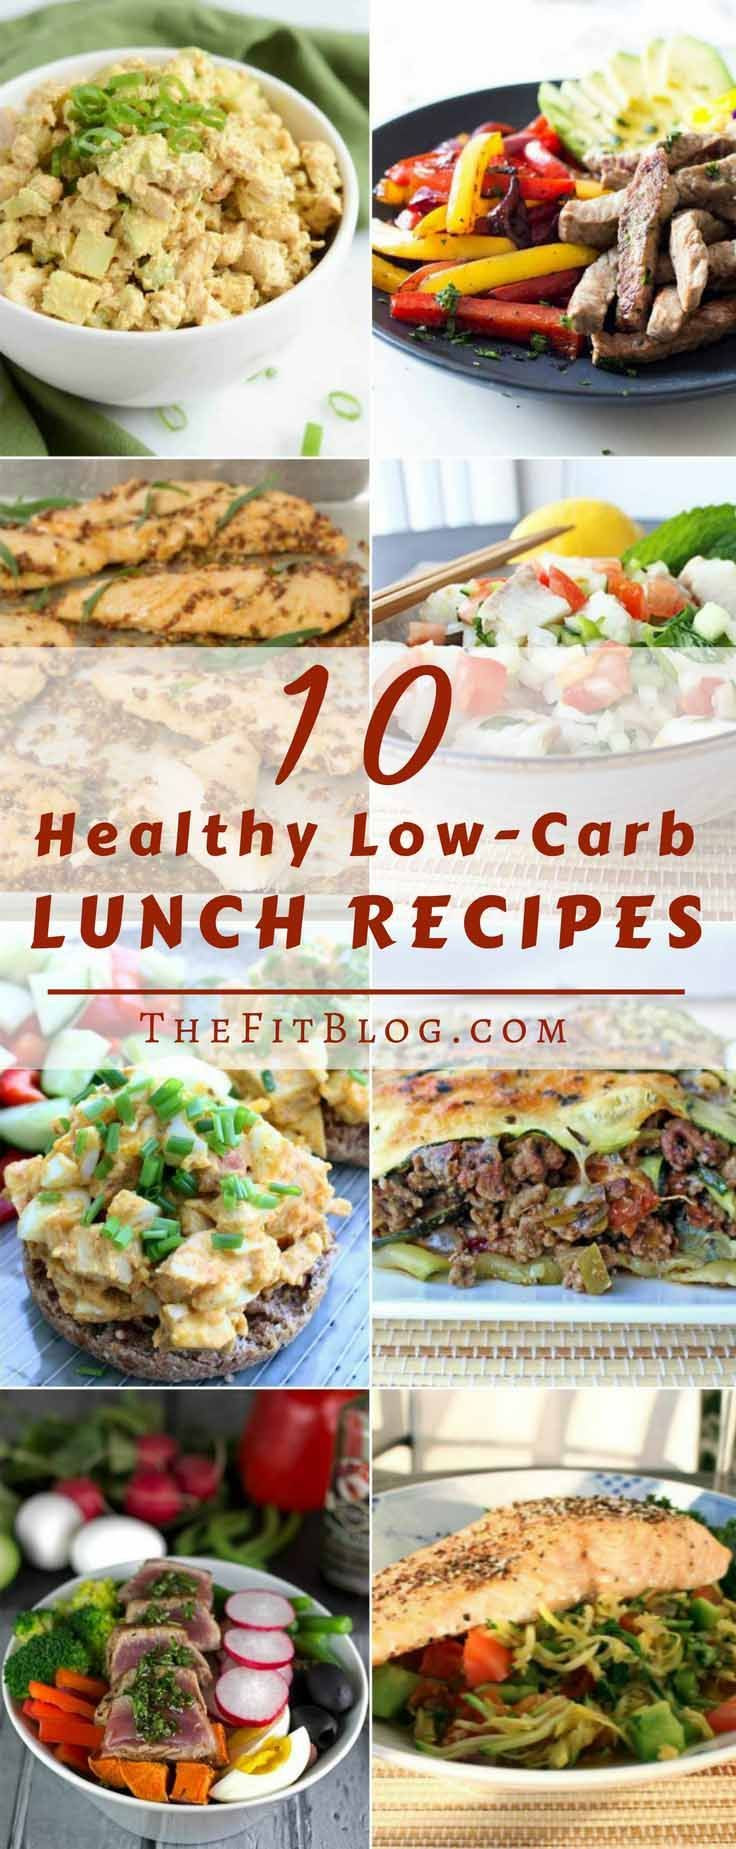 Low Carb Lunch Recipes
 17 Best images about Healthy Food Recipes Salads Meals